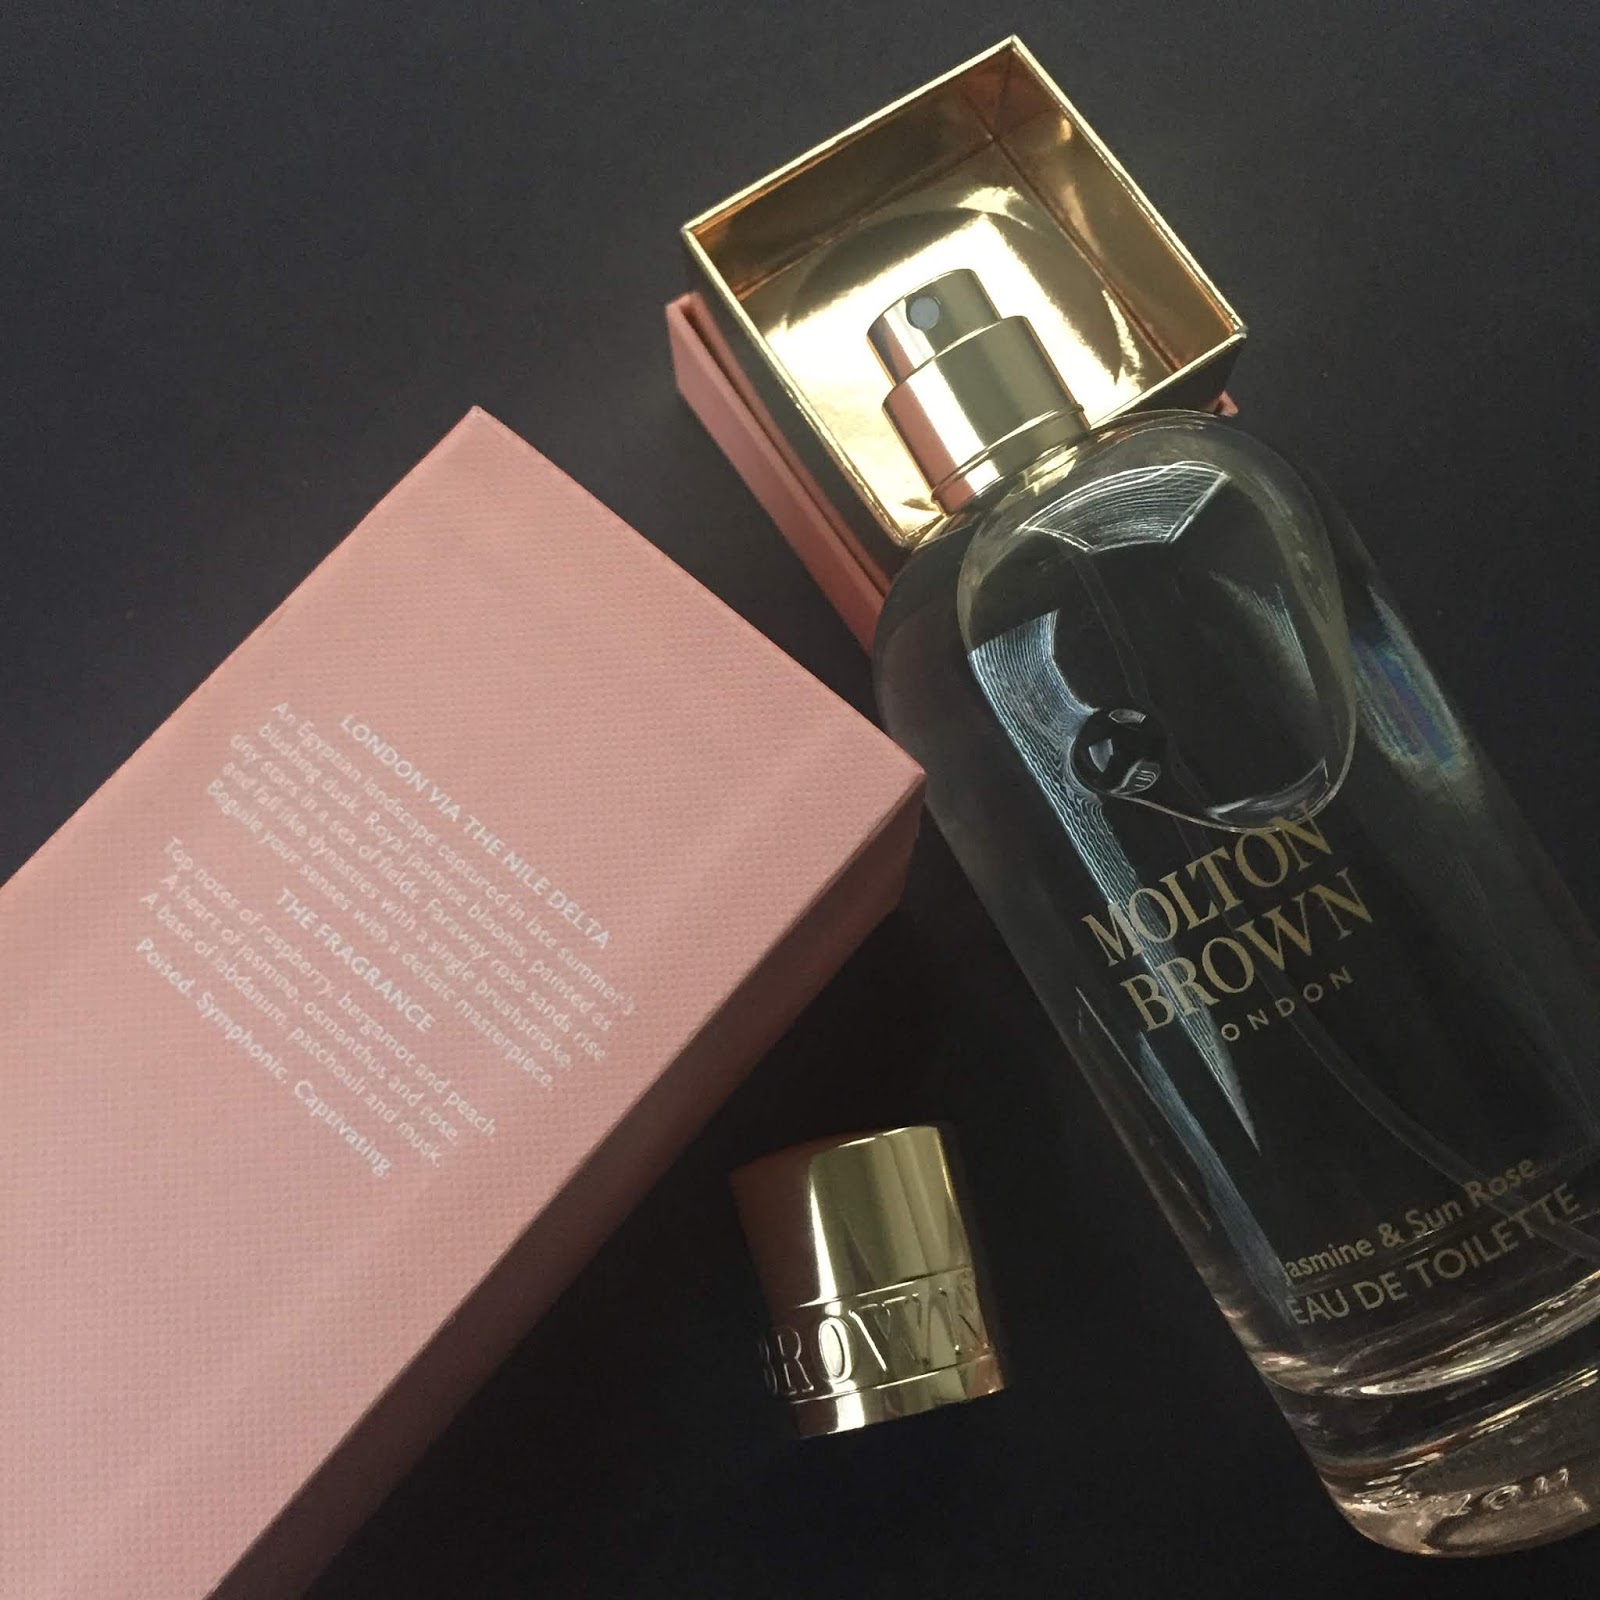 Molton Brown Jasmine And Sun Rose Eau De Toilette Perfume Review And Giveaway A Very Sweet Blog 